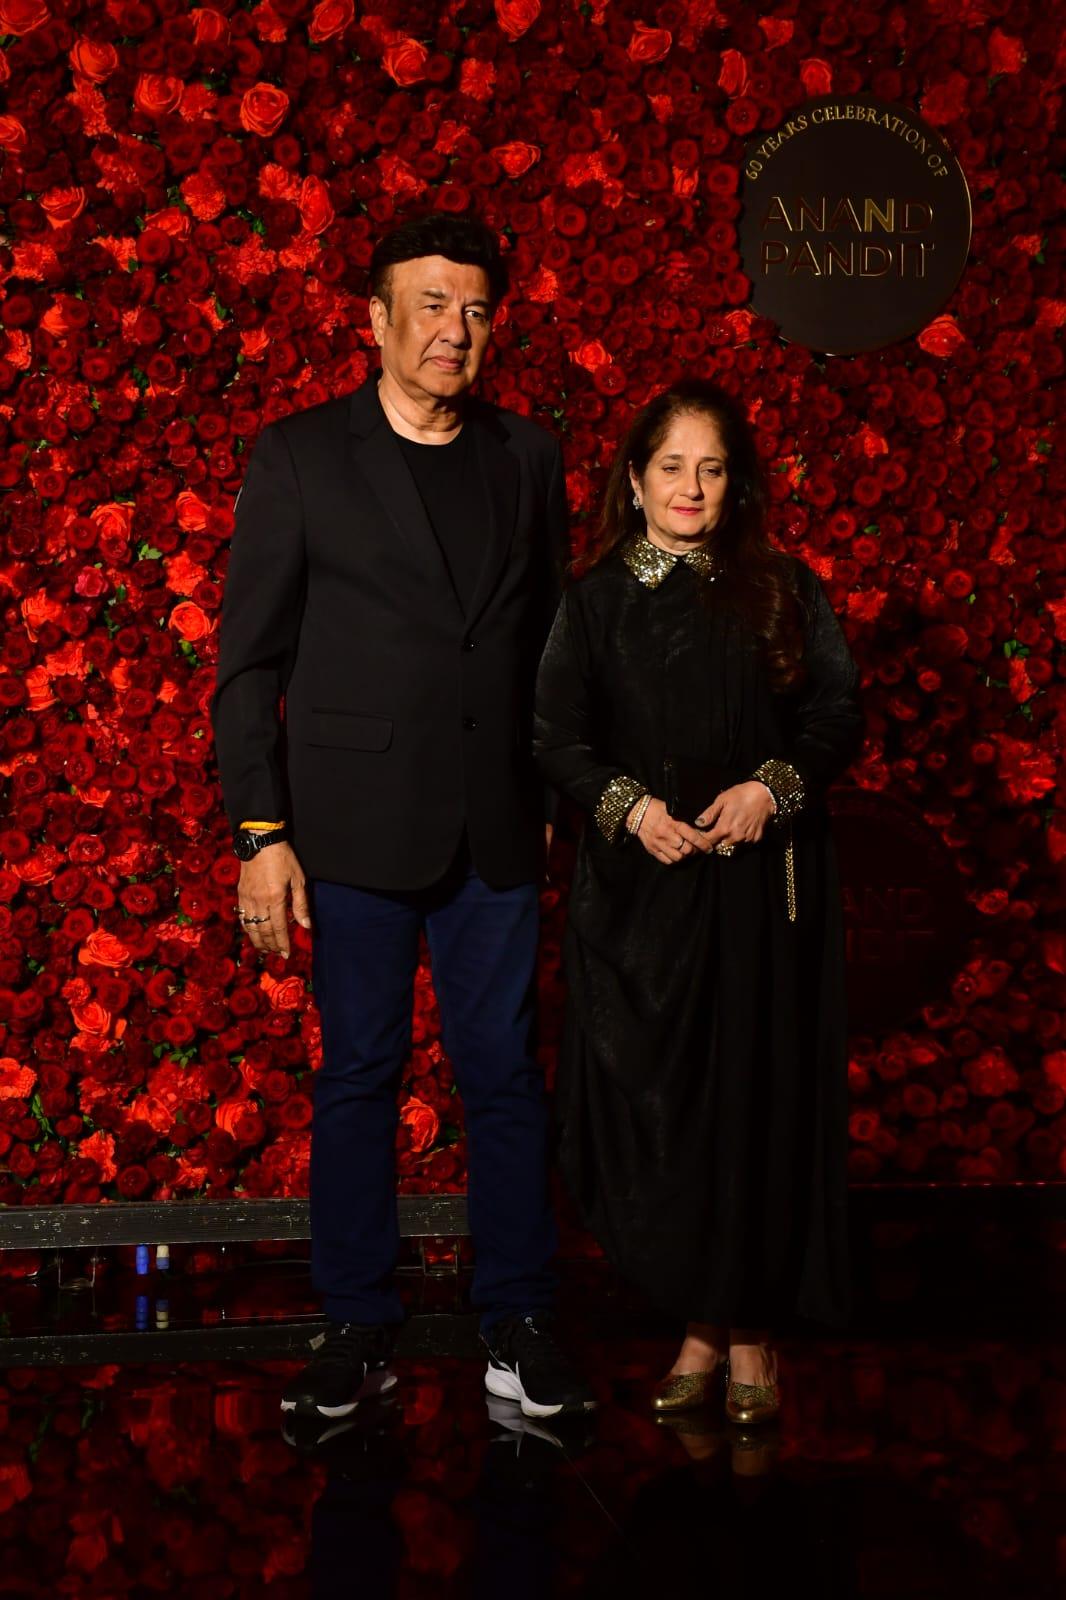 Anu Malik posed for the cameras with his doting wife Anju Anu Malik. The couple looked happy to be able to celebrate Anand Pandit